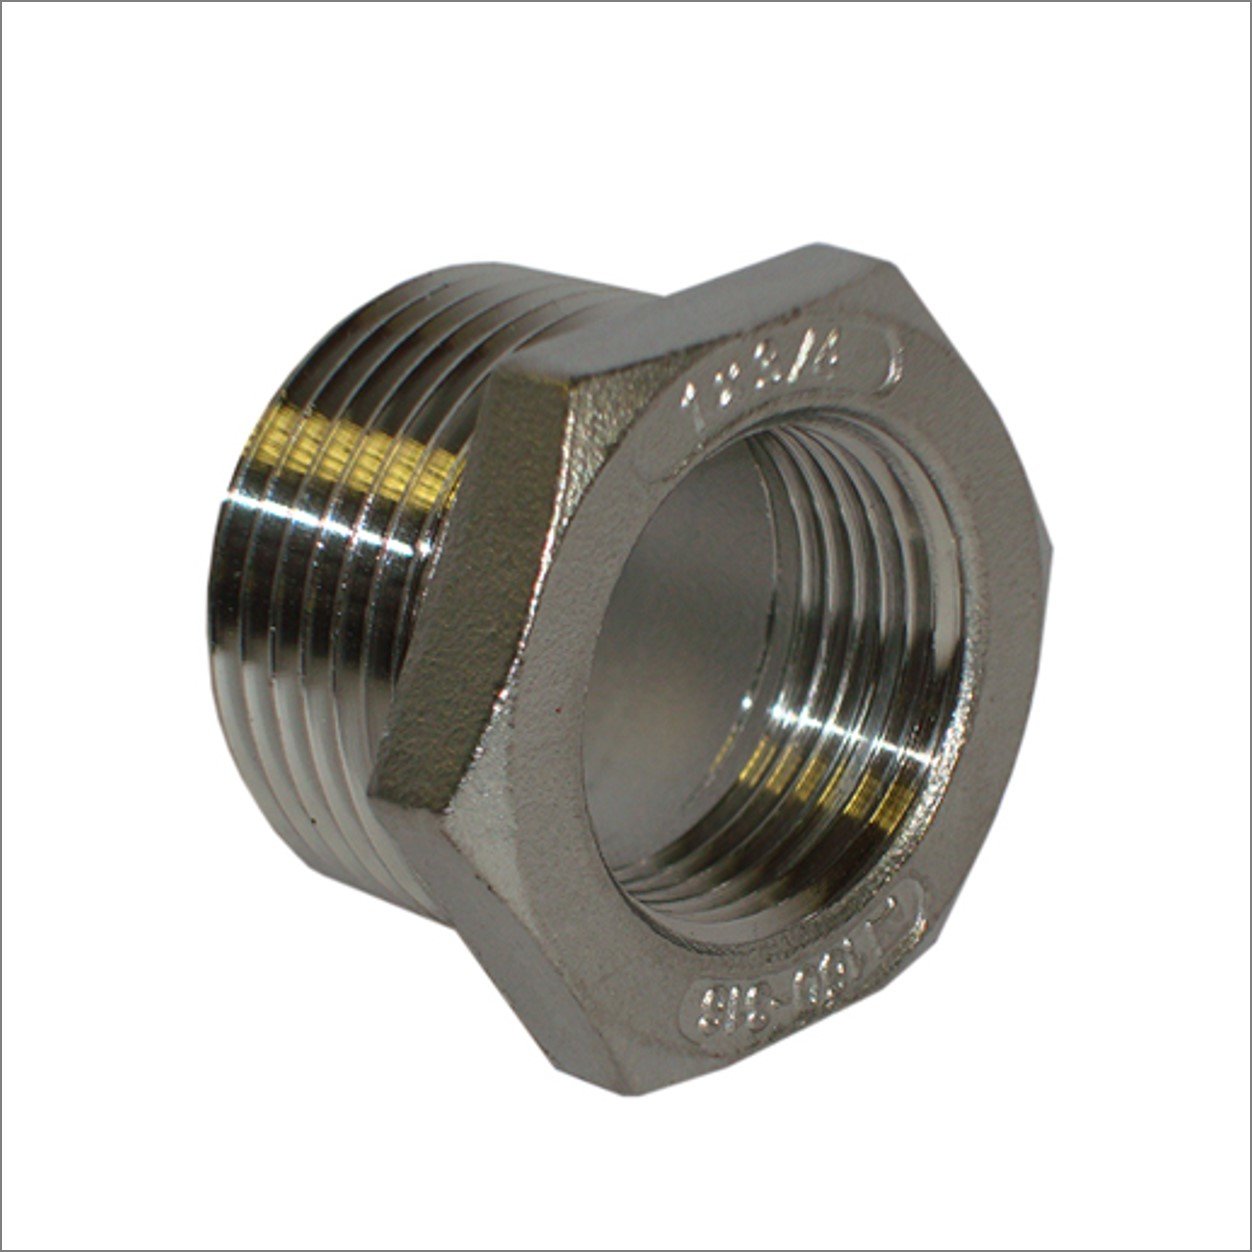 1-1/2" X 3/4" BSP Reducing Bush Black Malleable Iron Pipe Fitting 